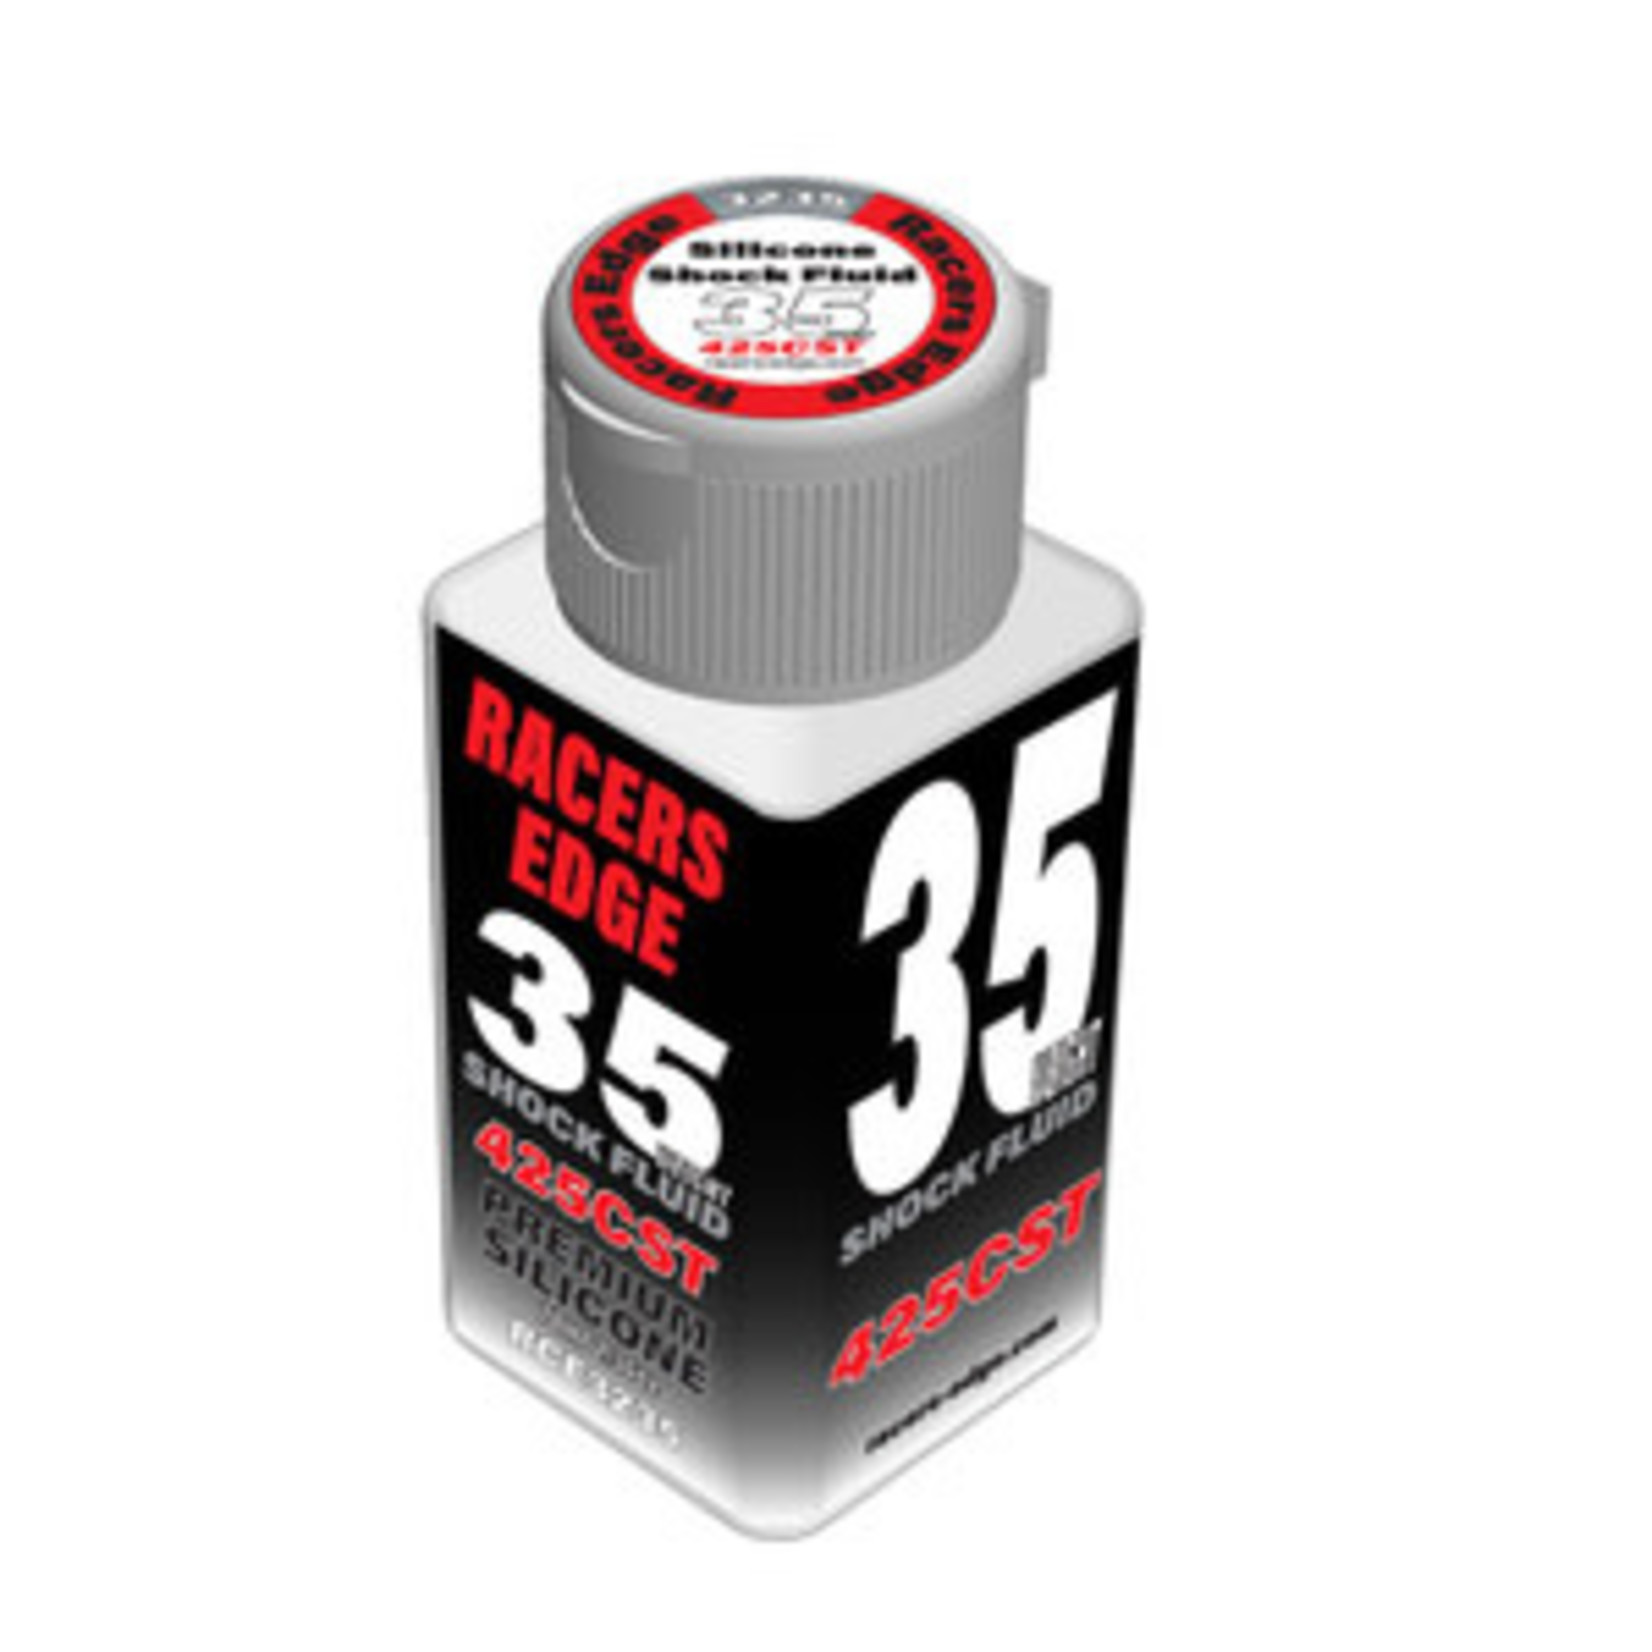 Racers Edge 35 Weight, 425cSt, 70ml 2.36oz Pure Silicone Shock Oil